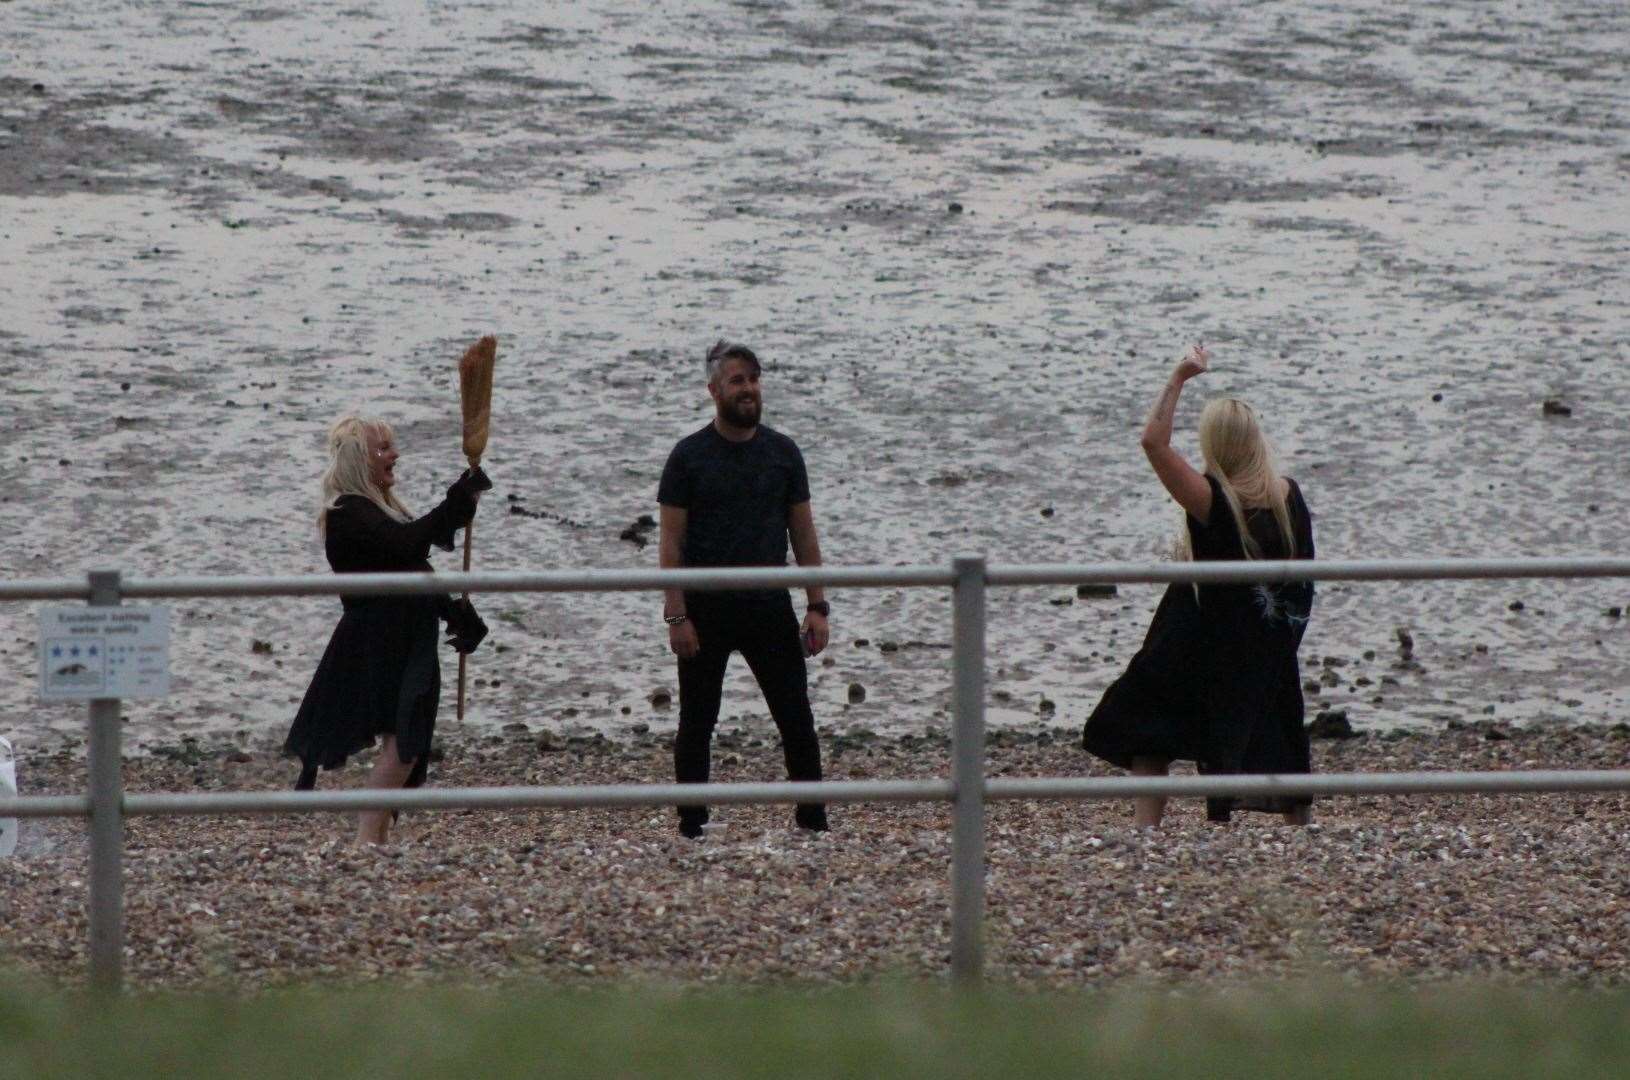 Casting a spell at the seaside - the witches of Sheppey